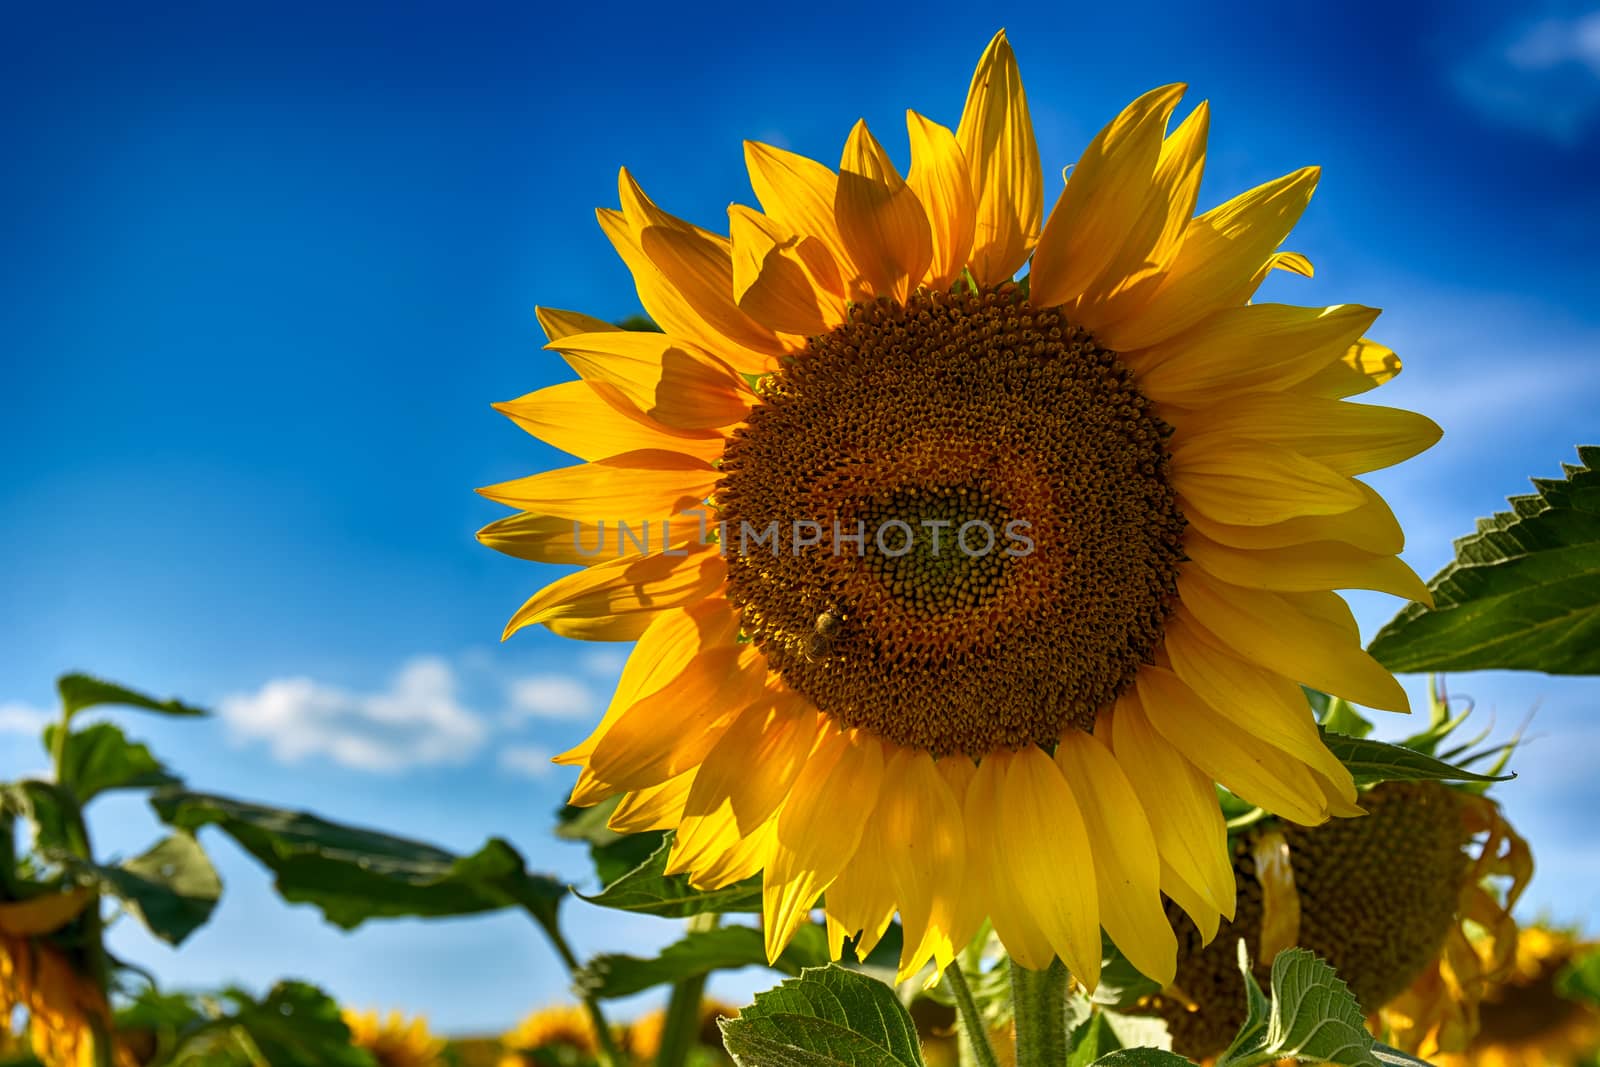 blooming sunflowers on a background sunset by constantinhurghea